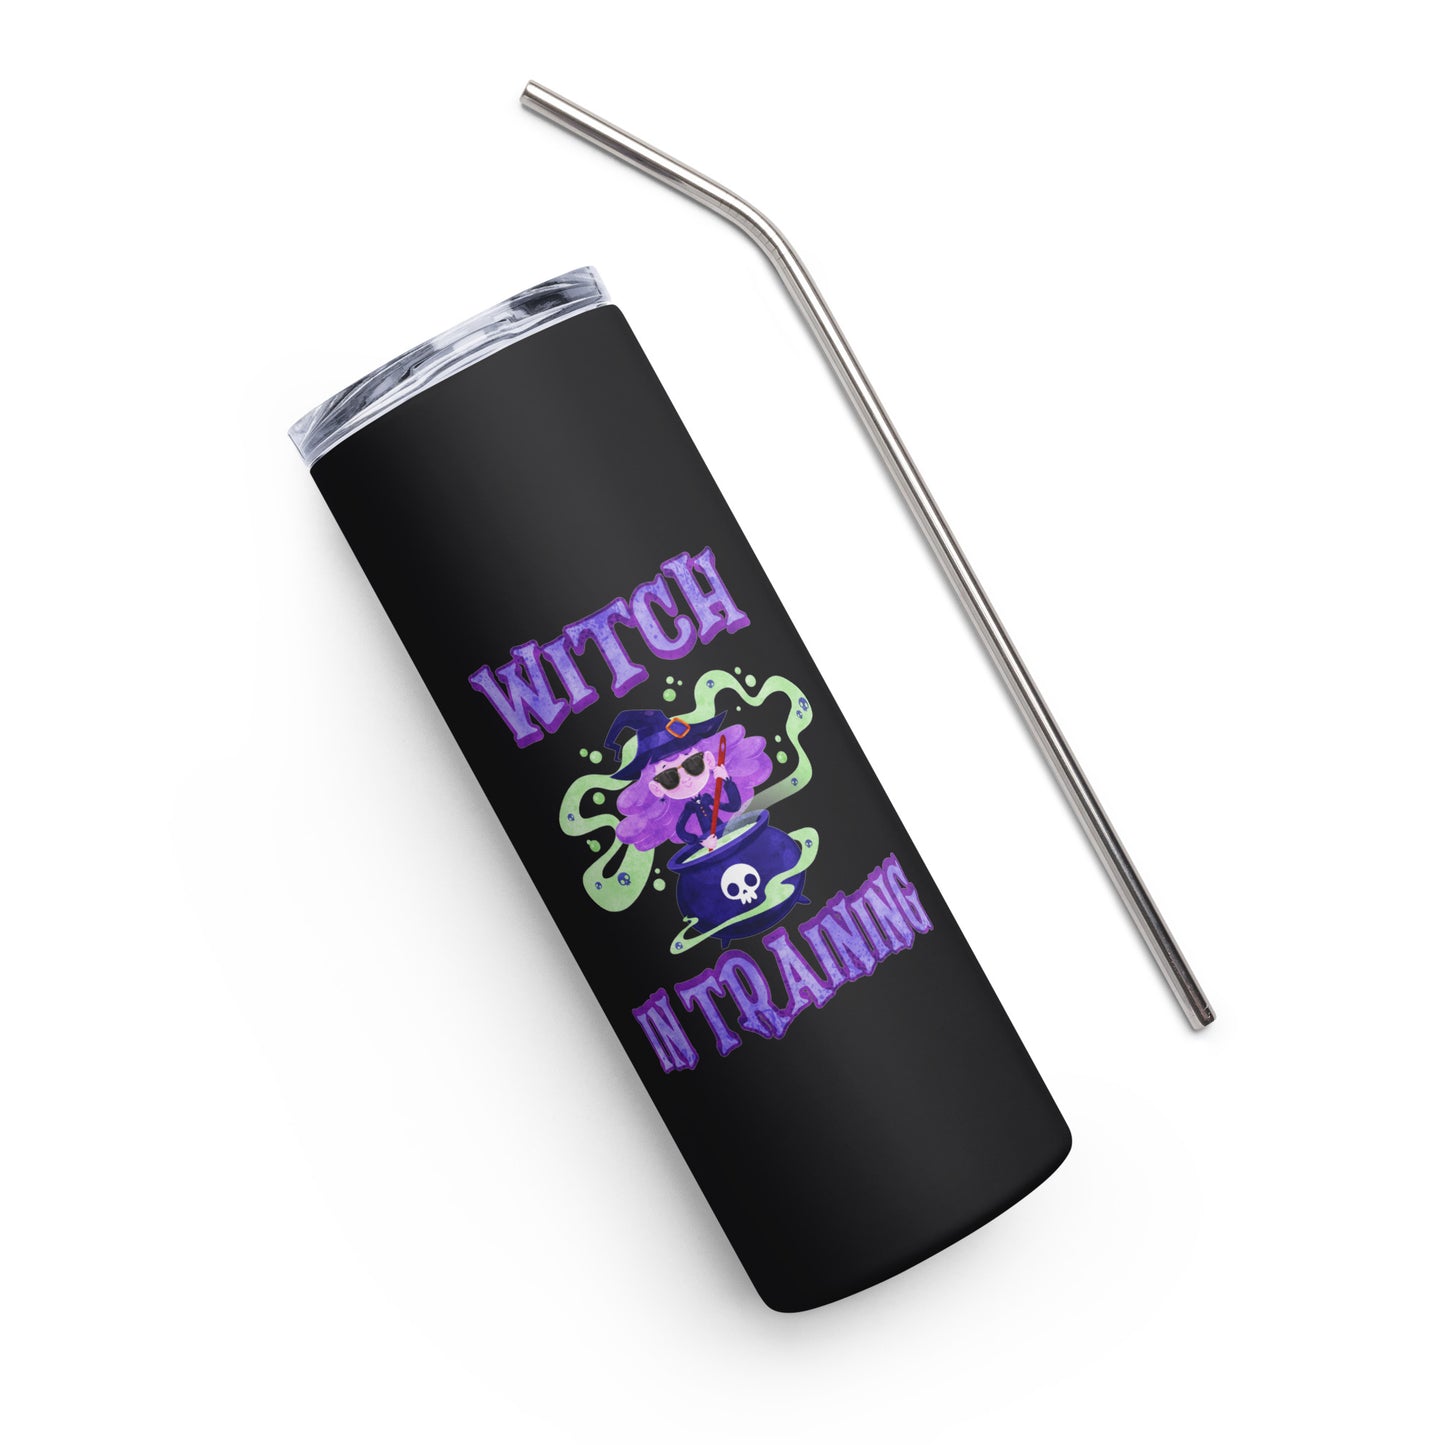 Witch in Training Stainless steel tumbler